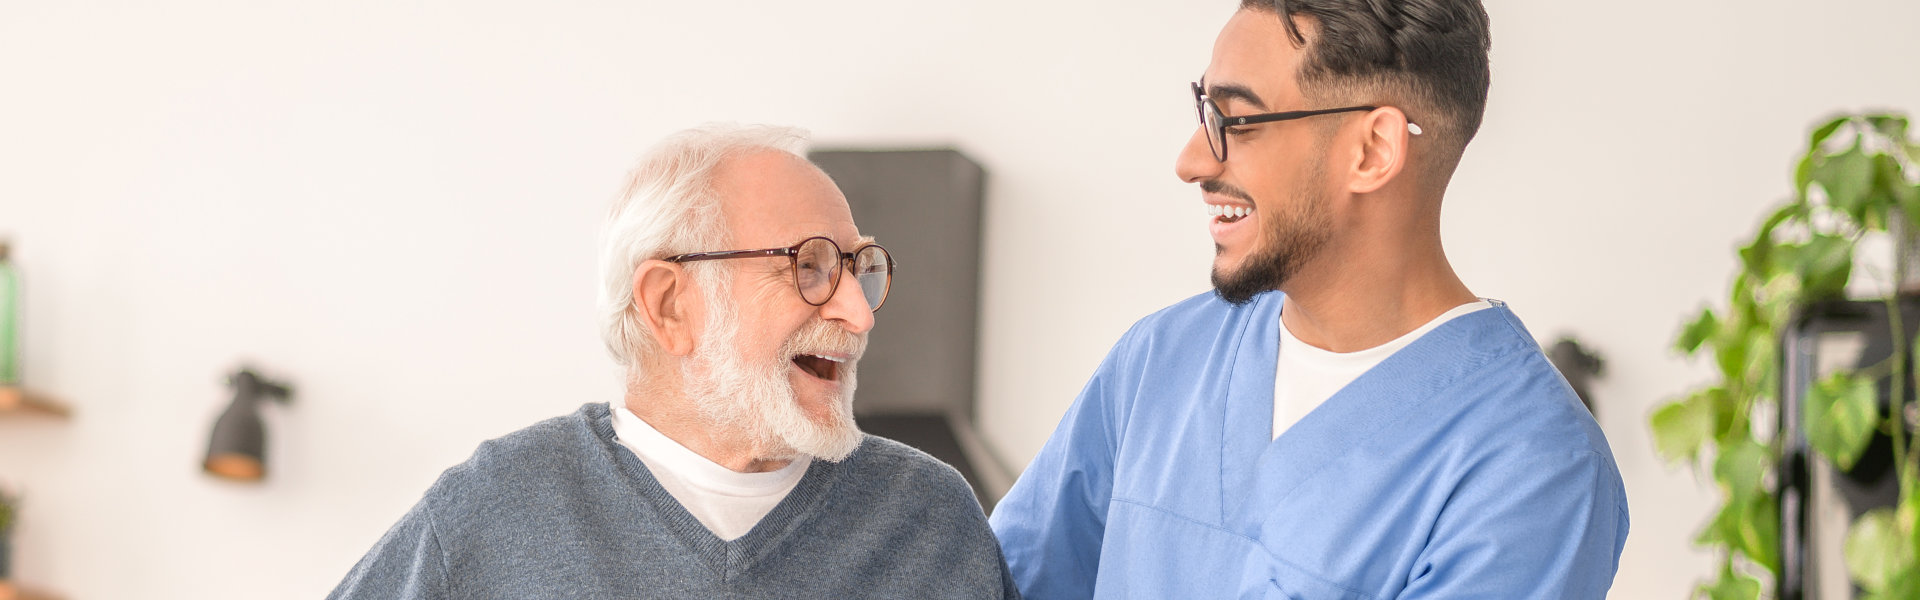 caregiver and patient smile at each other